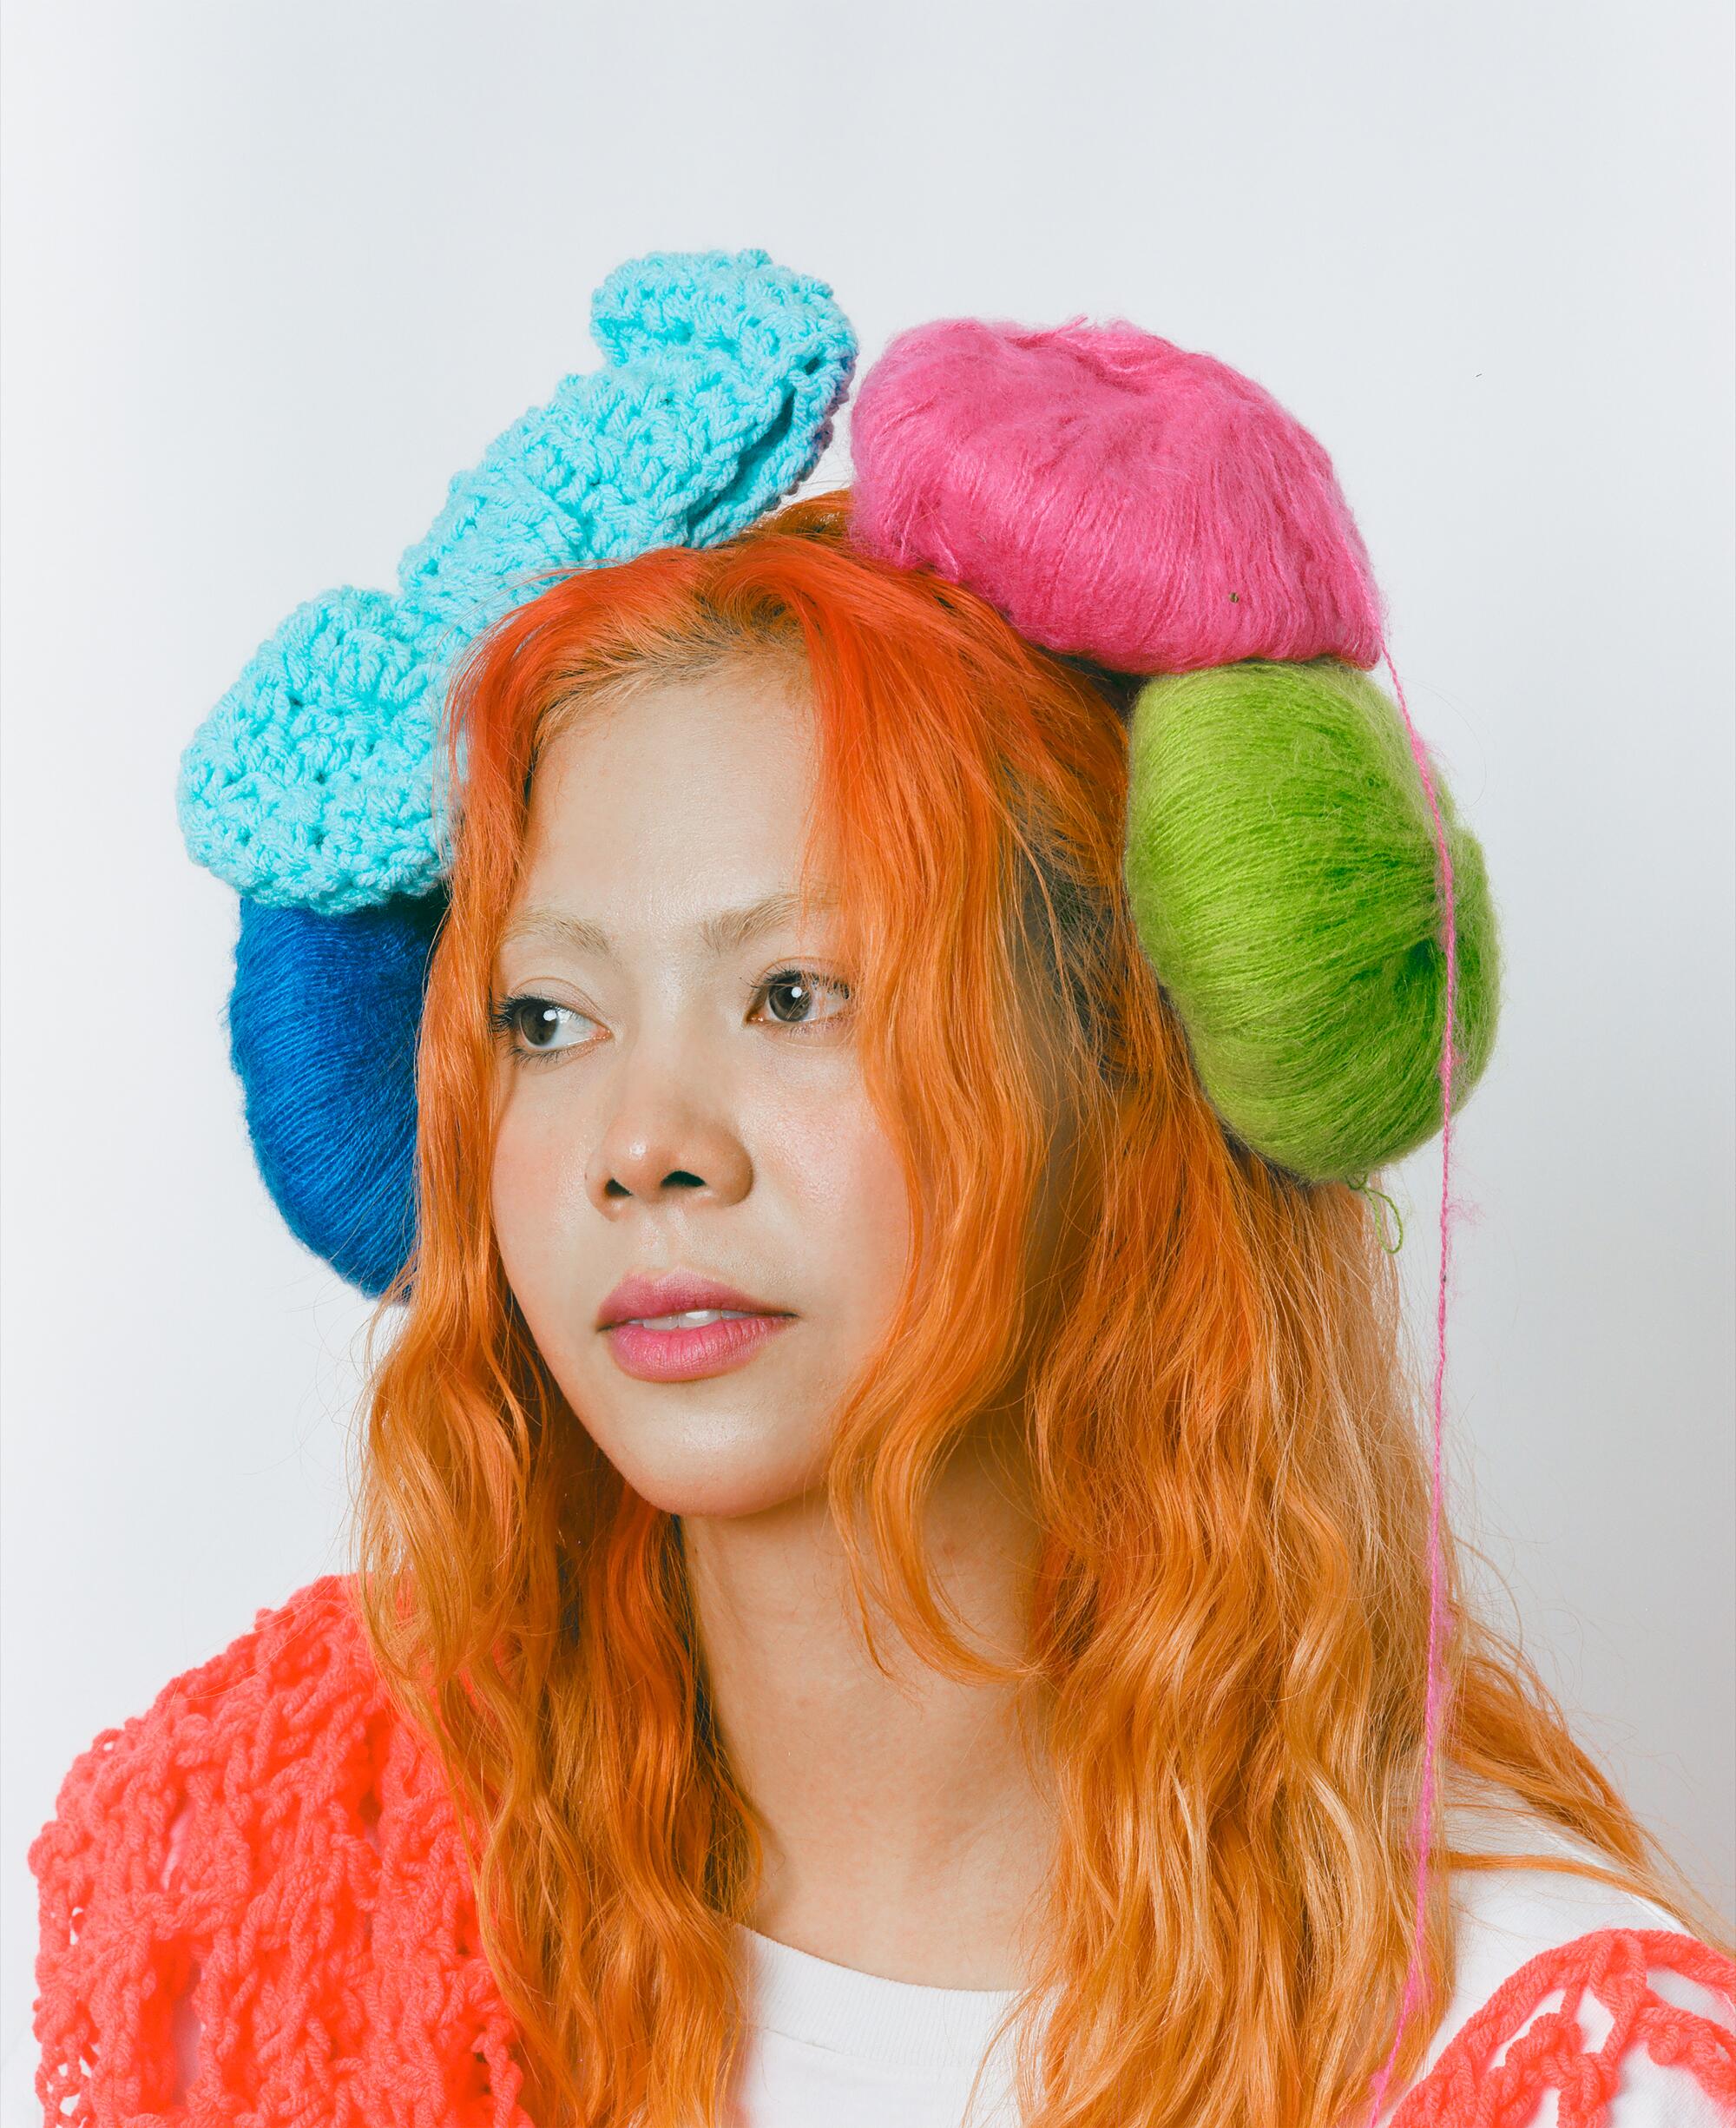 A woman with orange hair wears colorful balls of yarn as a headpiece.